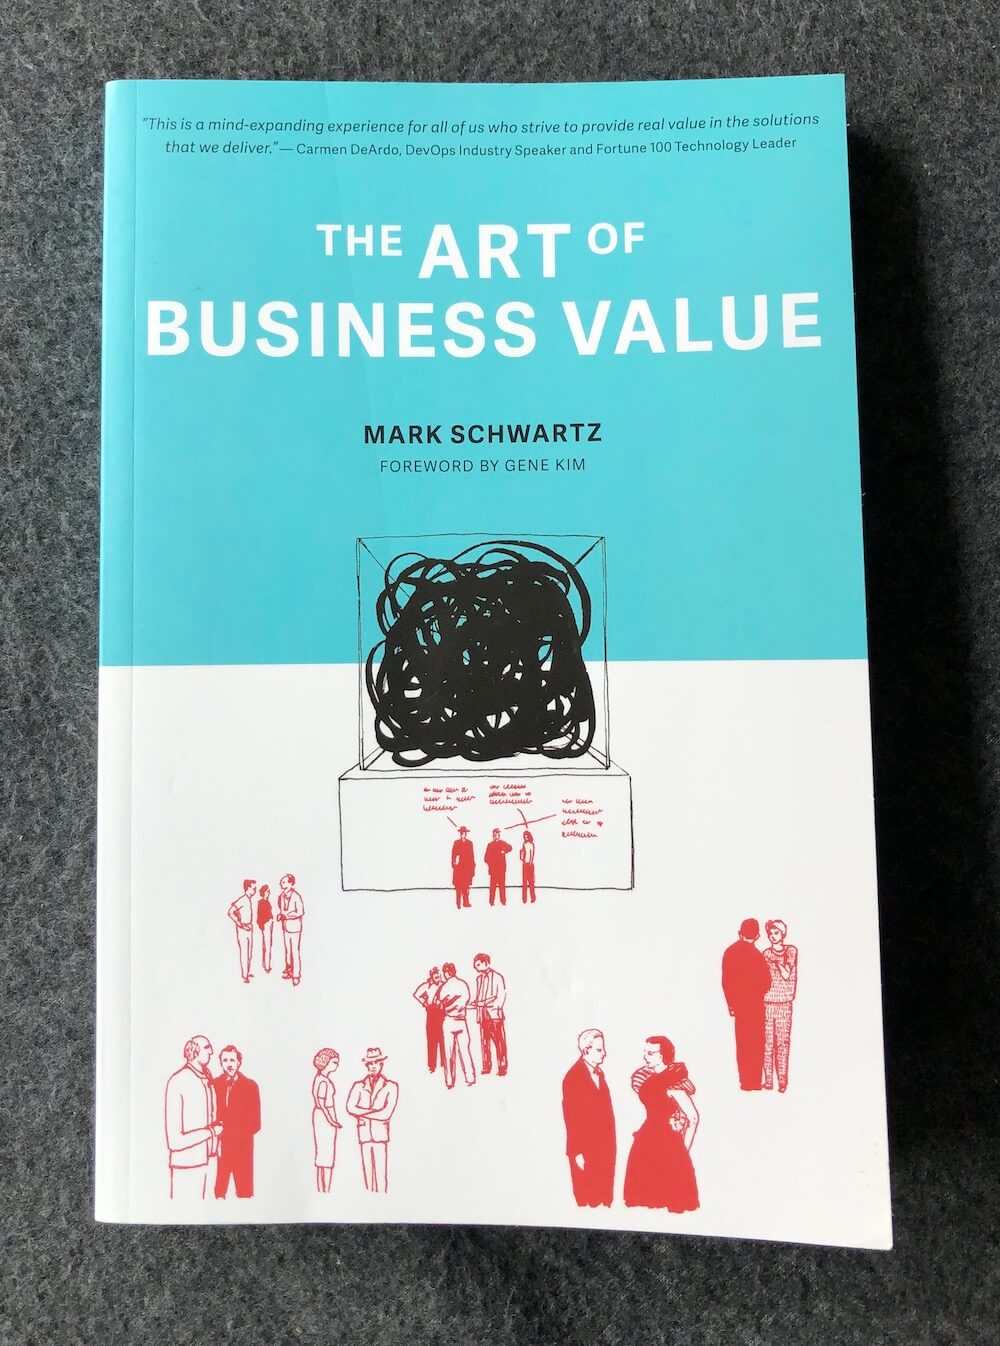 Photo of The Art of Business Value by Mark Schwartz